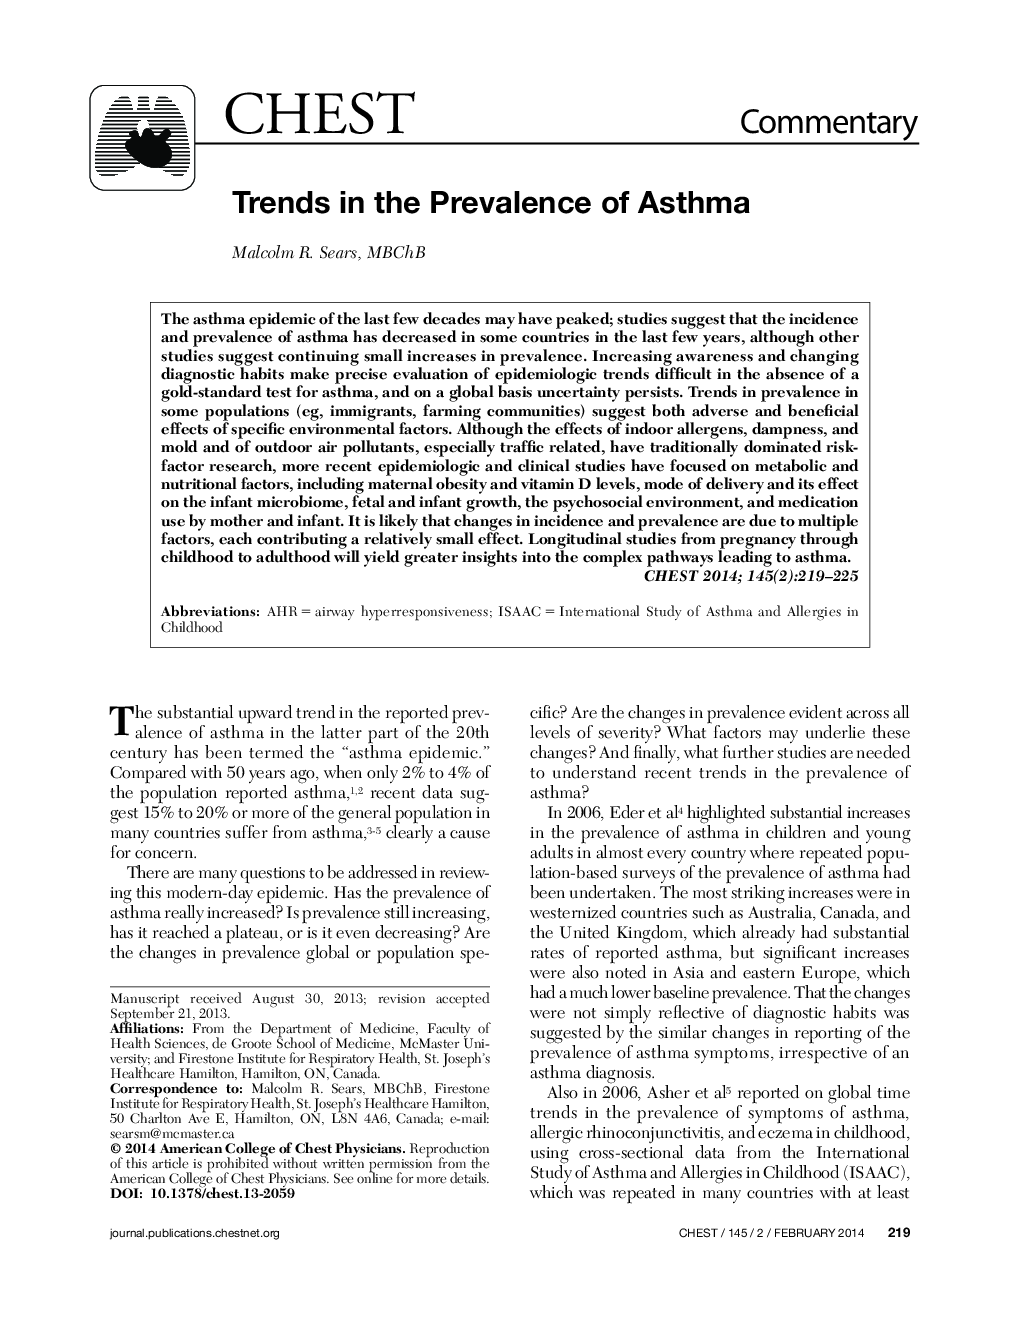 Trends in the Prevalence of Asthma